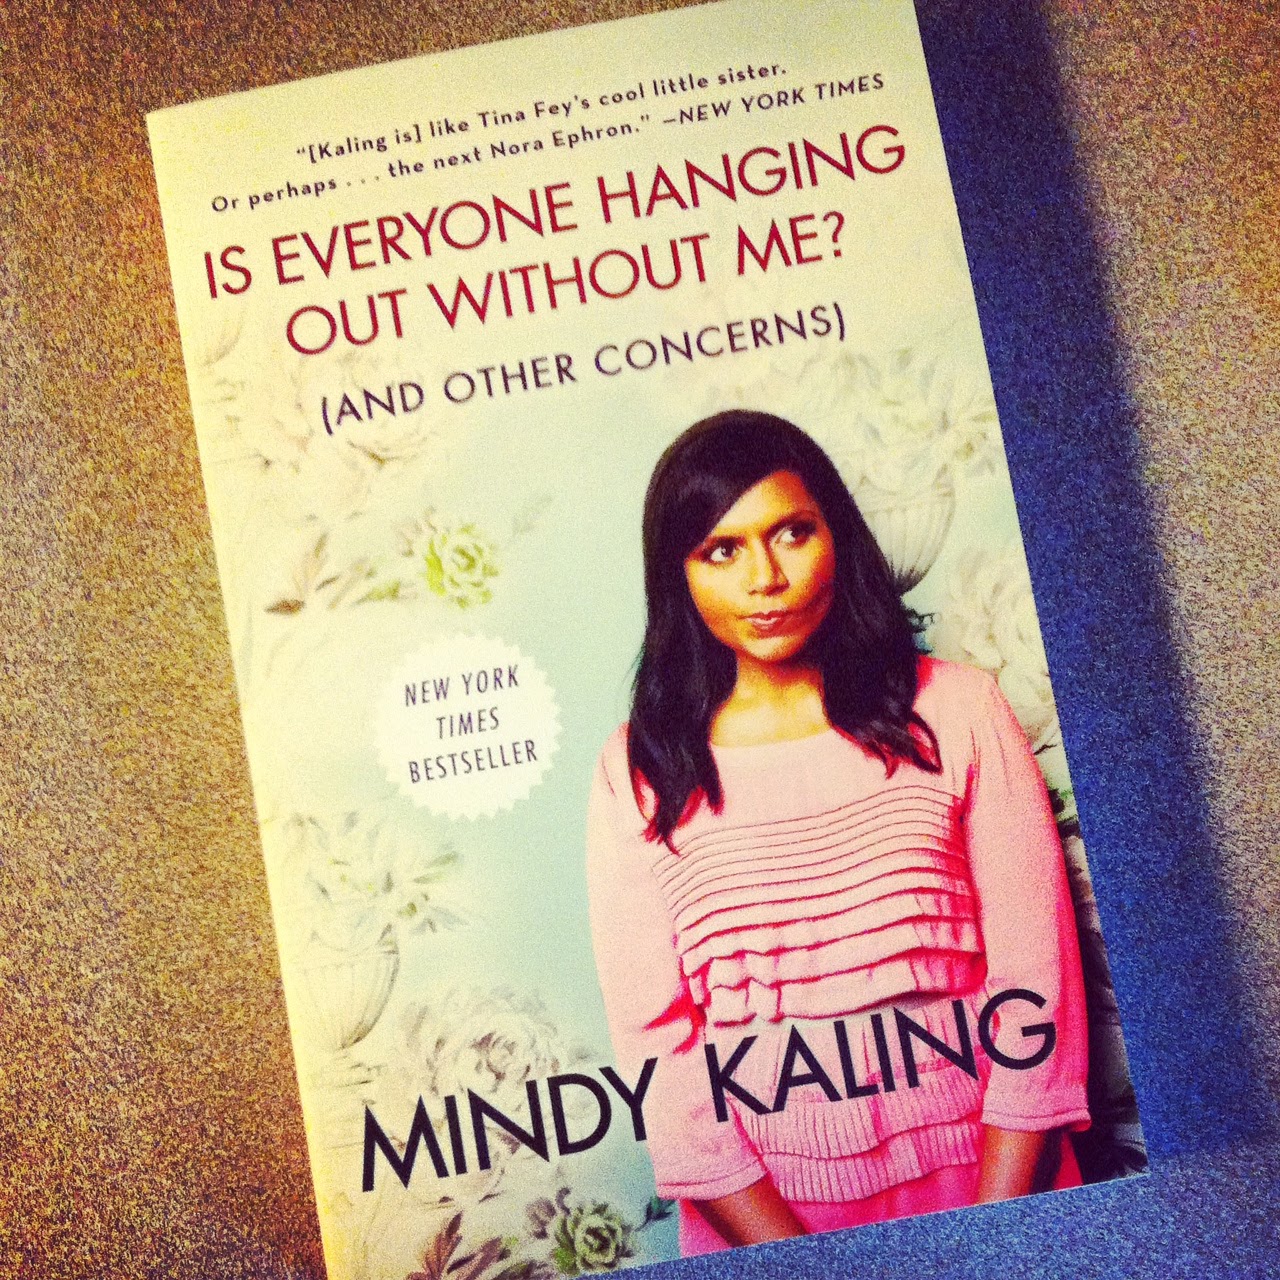 http://www.womaninthemancave.com/2014/09/mindy-kalings-is-everyone-hanging-out.html